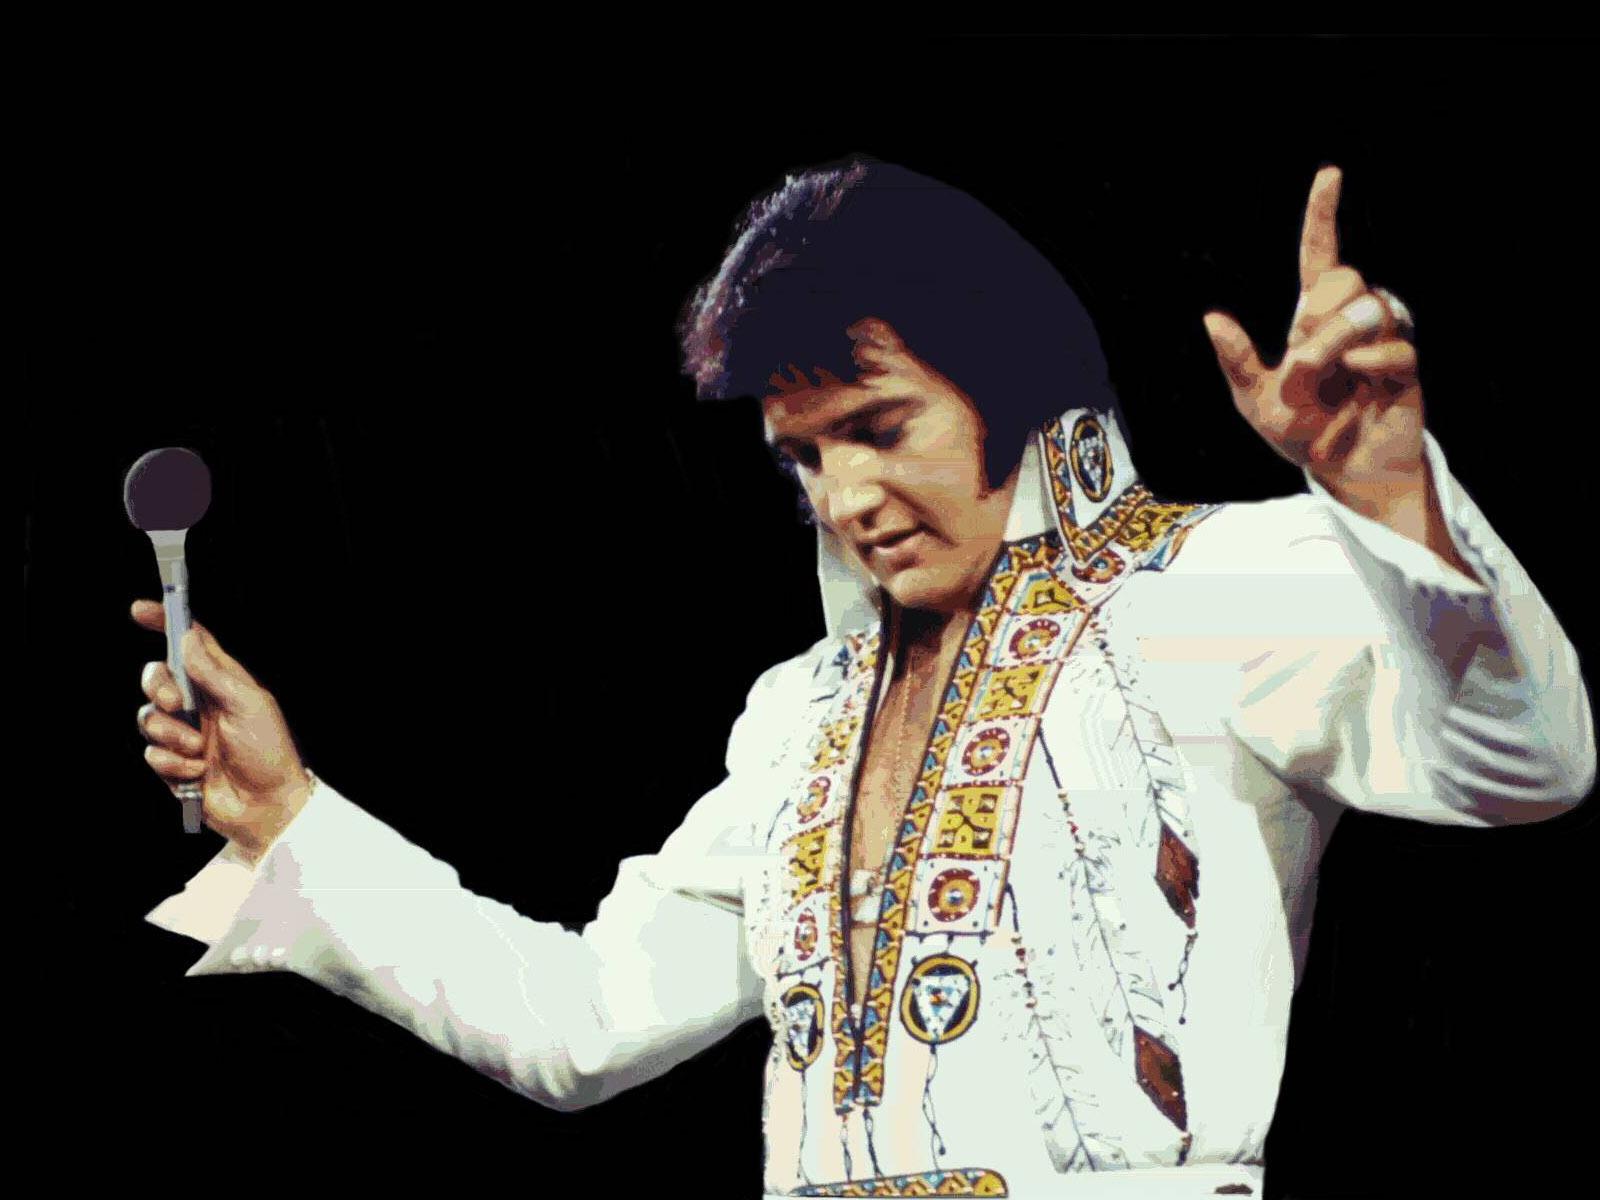 No One’s Got a Perfect Score on This General Knowledge Quiz (feat. Elvis Presley) — Can You? elvis